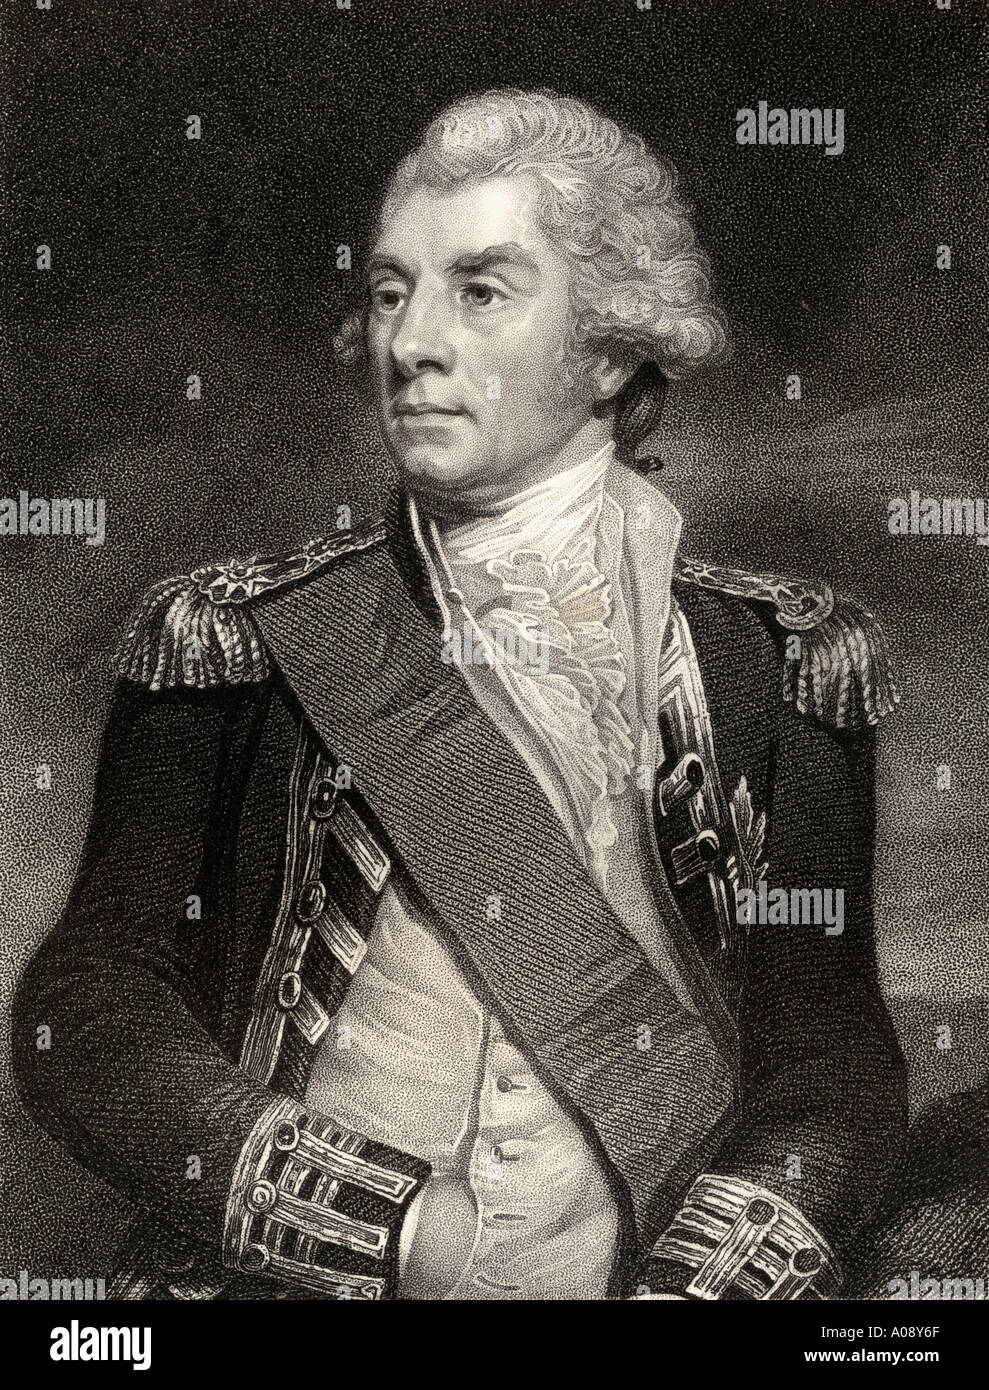 Lord Keith. Admiral George Keith Elphinstone aka Lord Keith, Viscount Keith, 1746 - 1823. Stock Photo